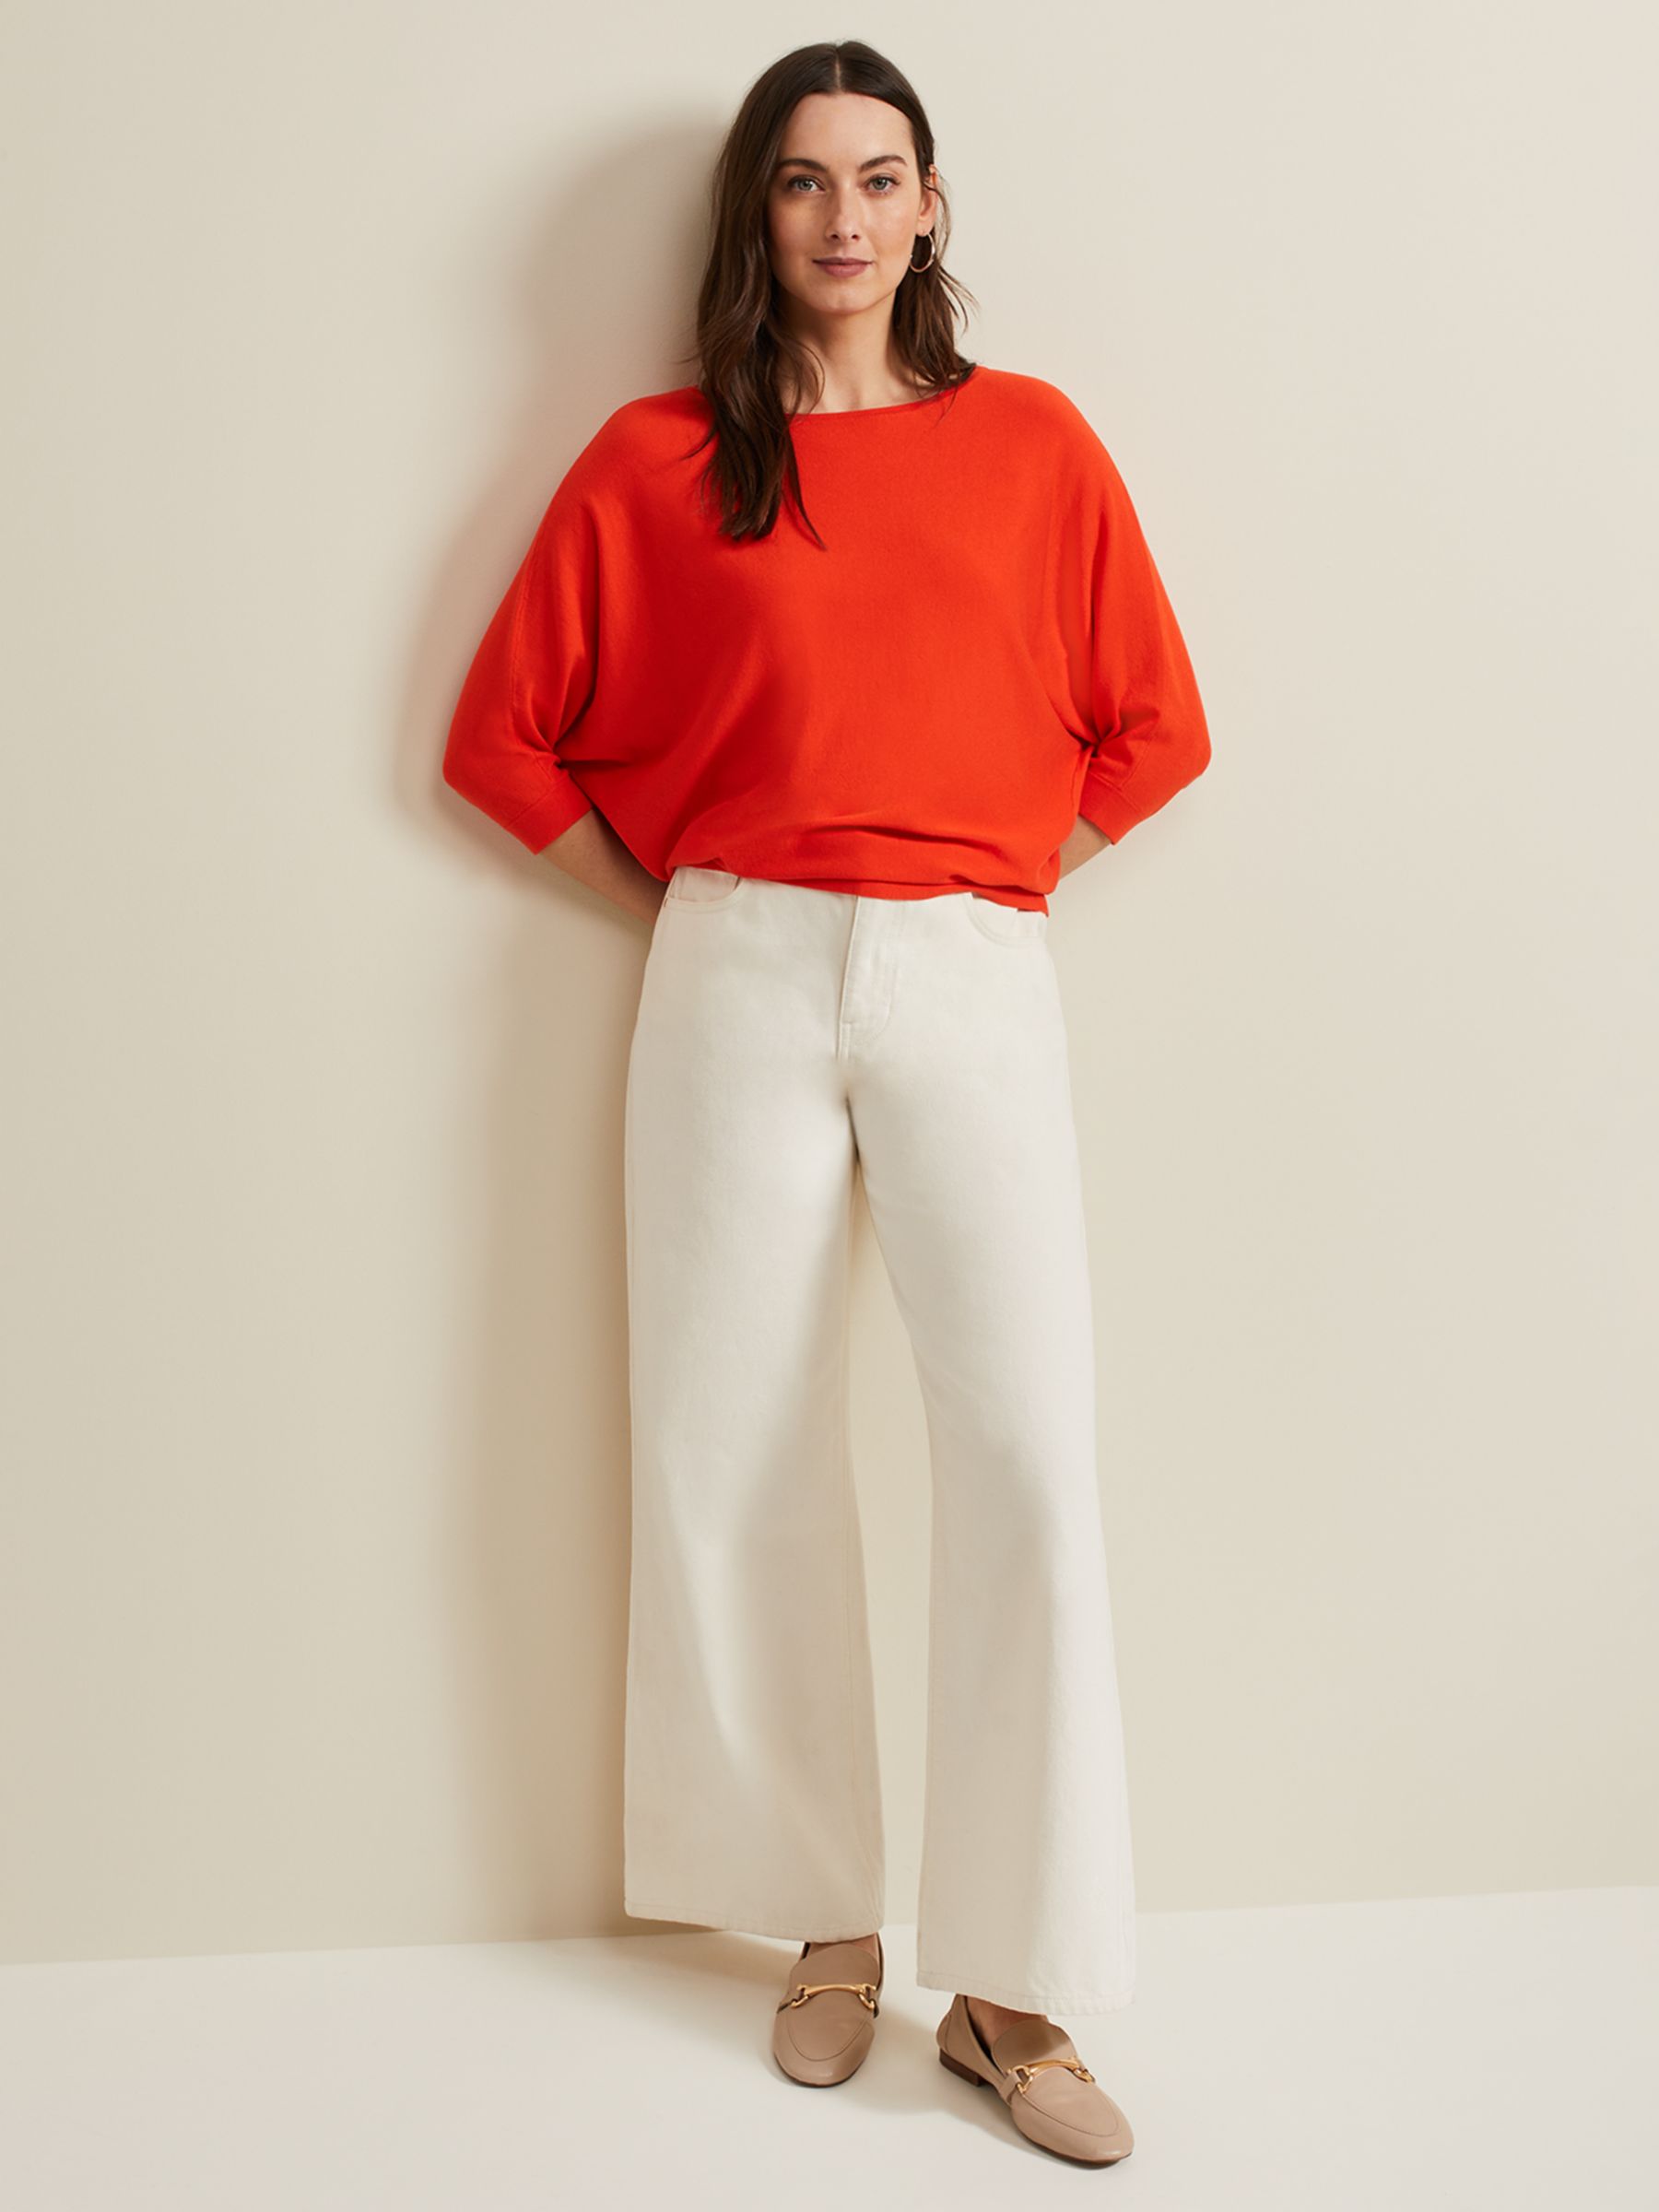 Buy Phase Eight Cristine Fine Knit Batwing Jumper Online at johnlewis.com